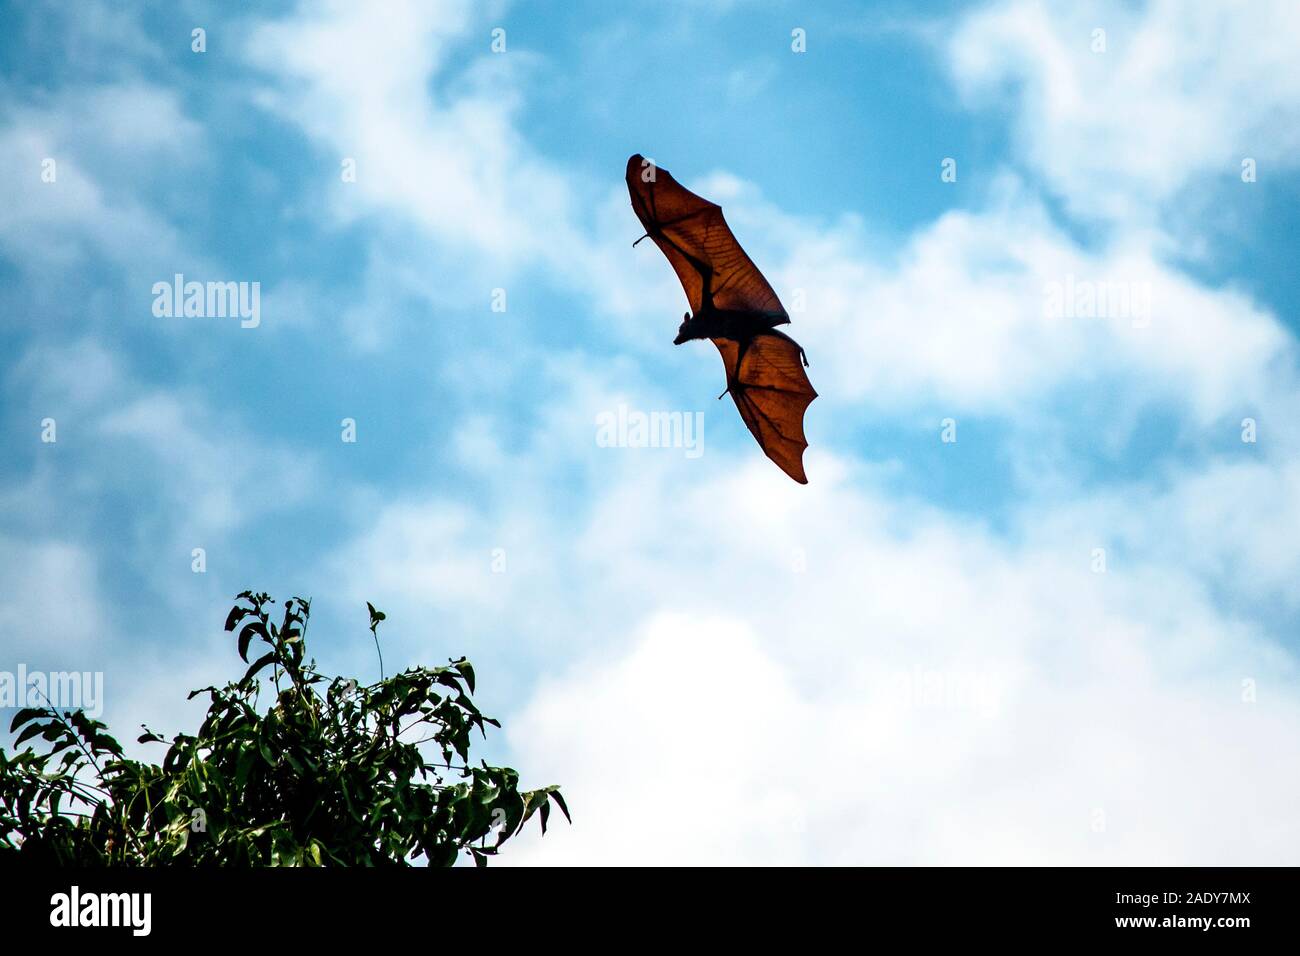 Giant fruit bat spreads its wings flying through sky towards tree branch Stock Photo